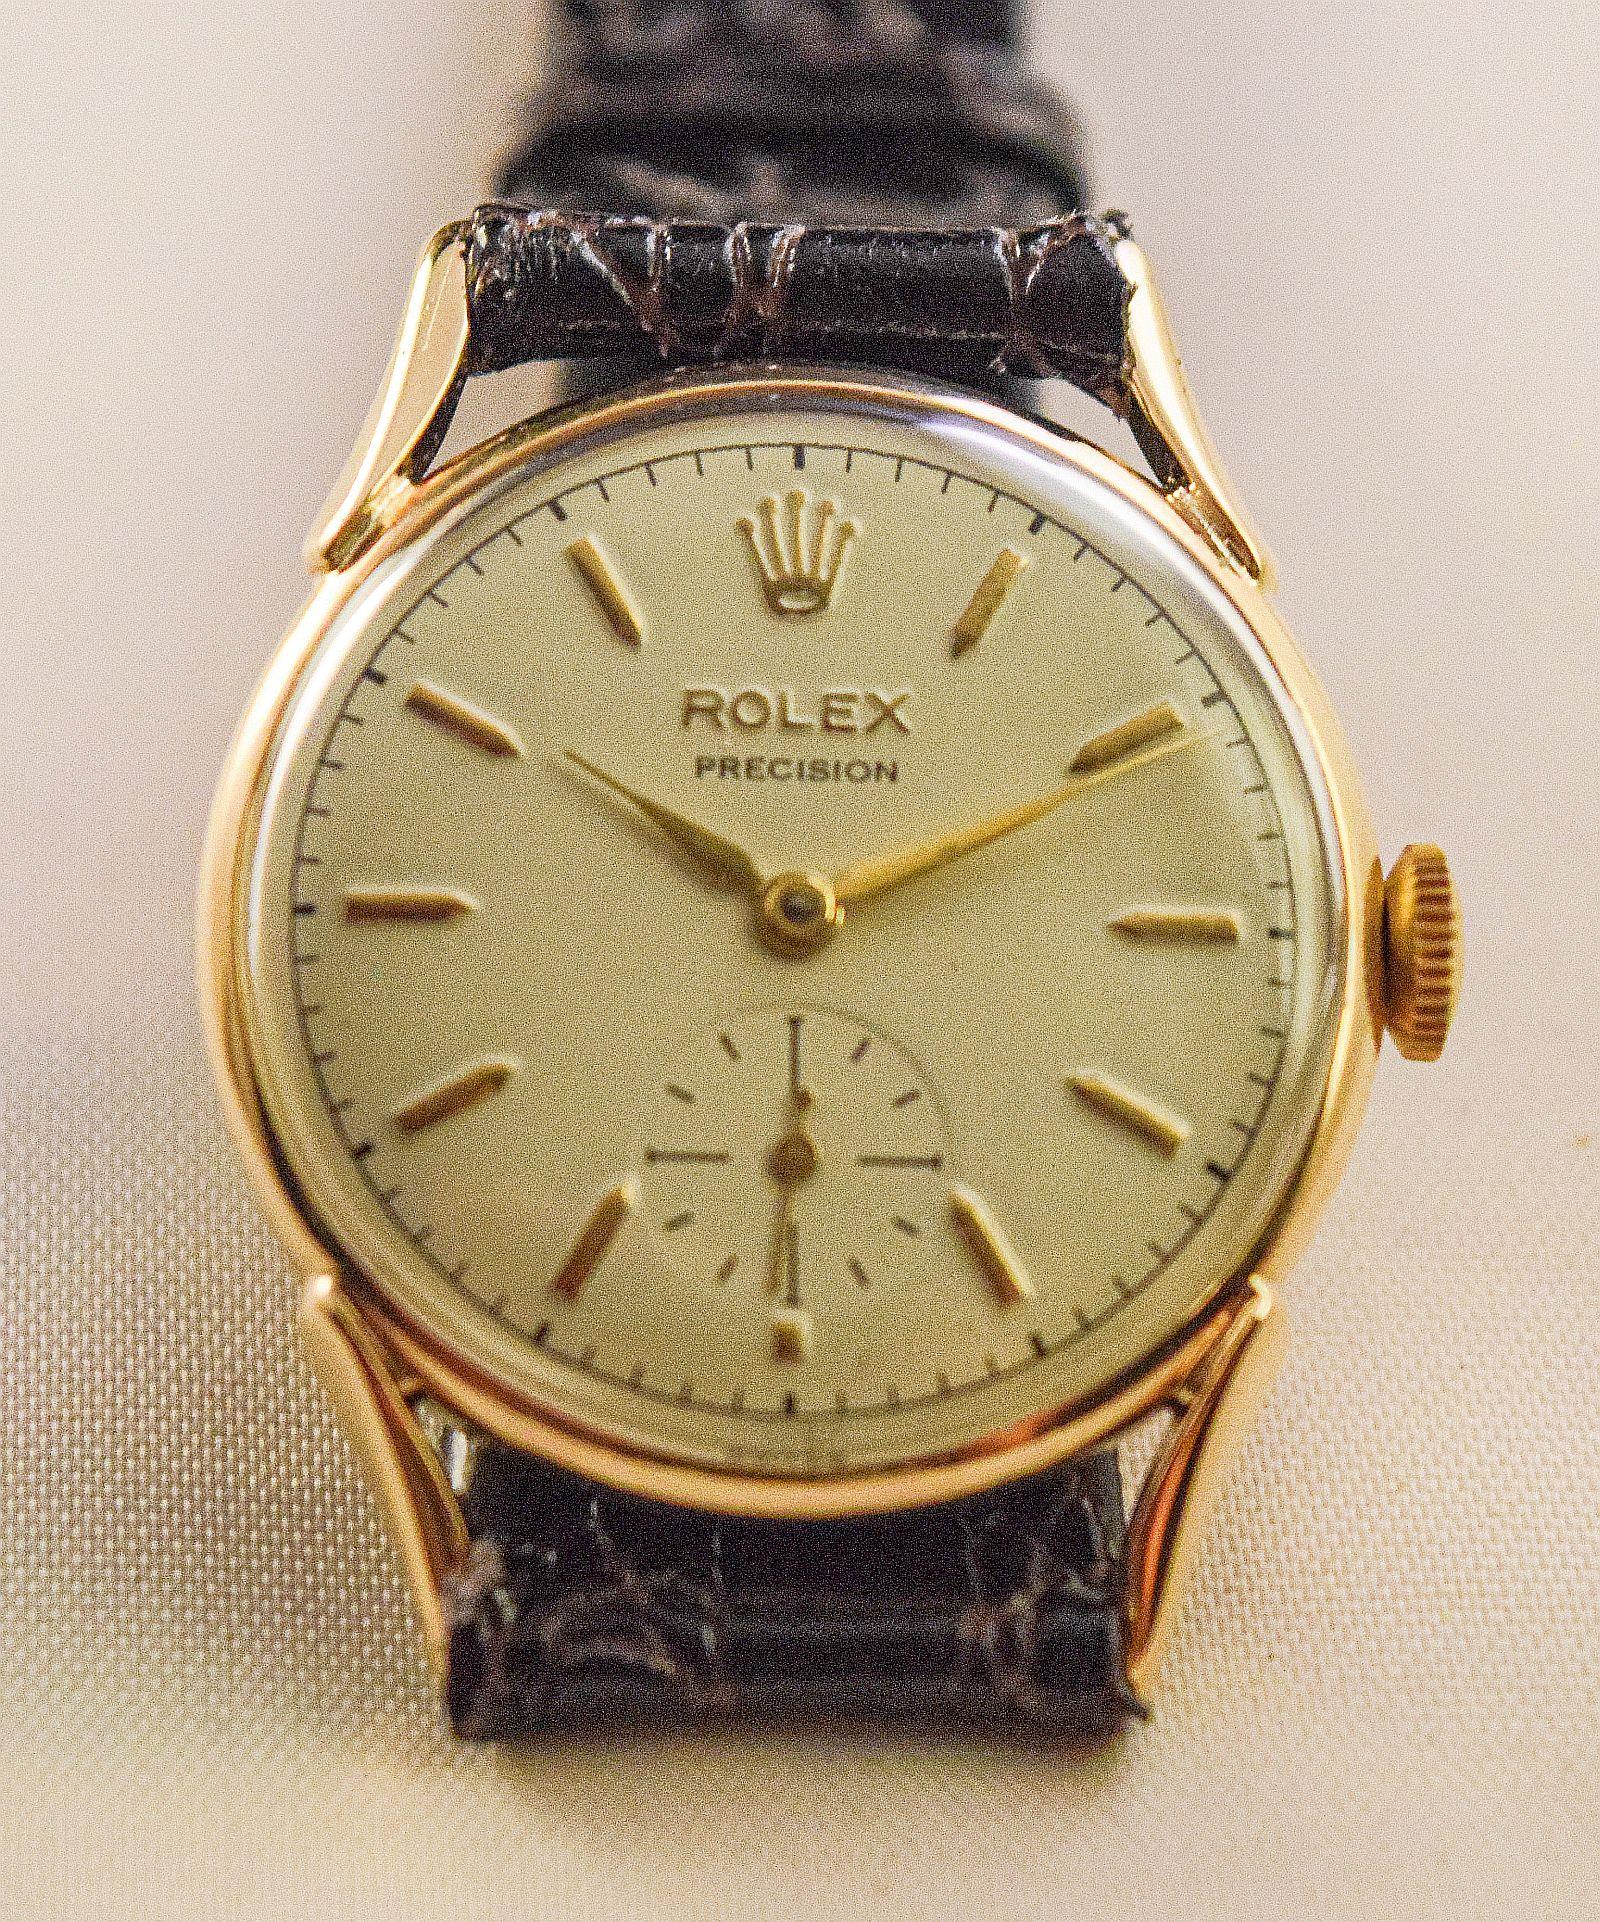 Women's or Men's Rolex extremely rare solid gold watch with unusual lugs